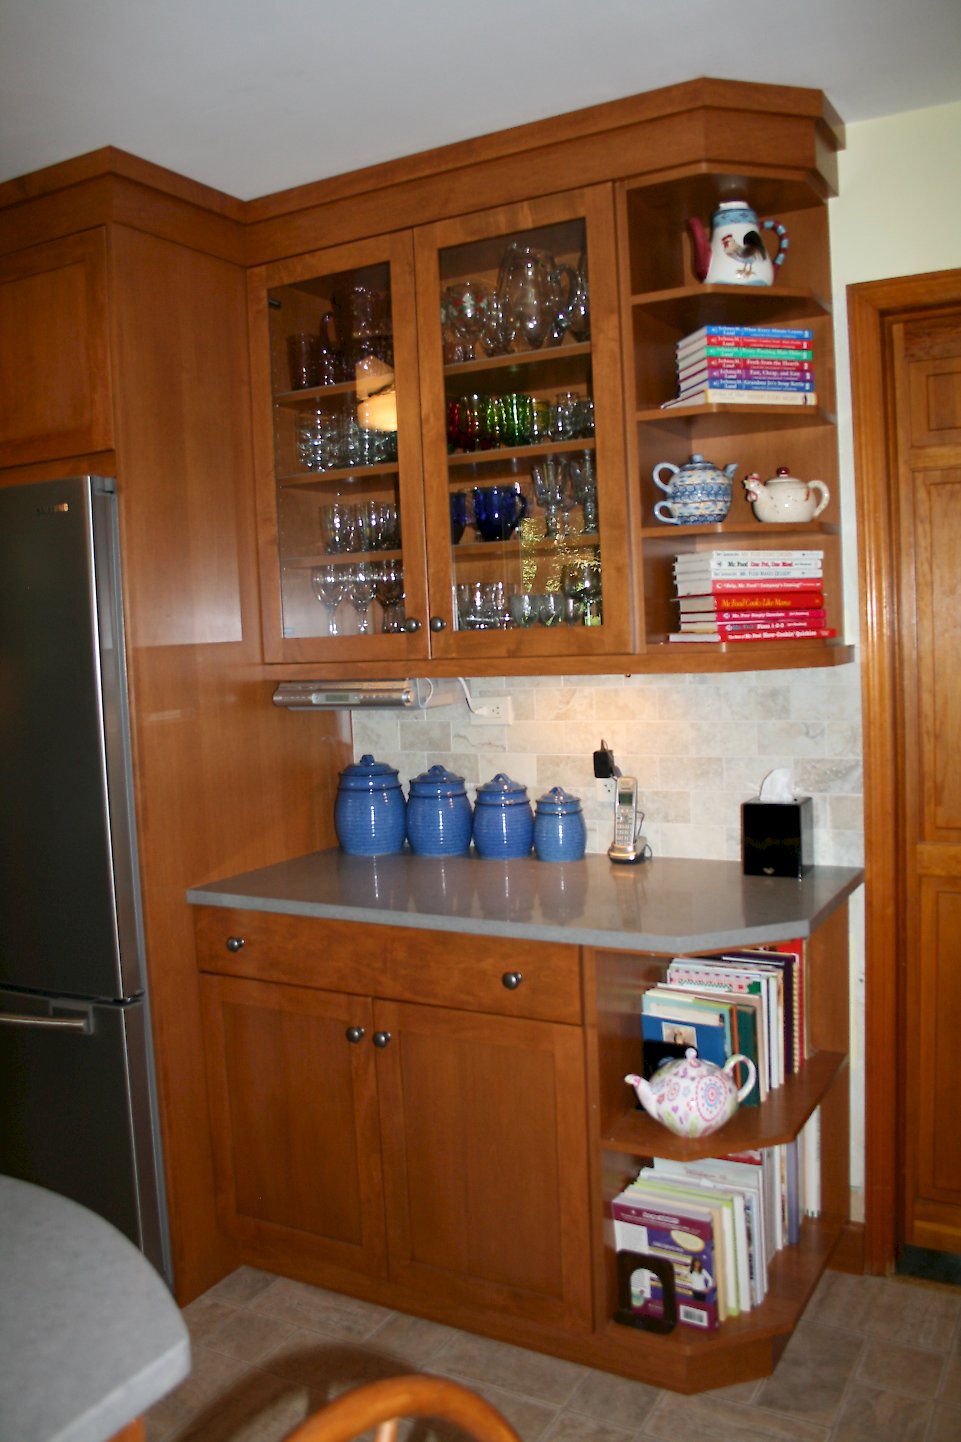 Cabinetry on the refrigerator wall.